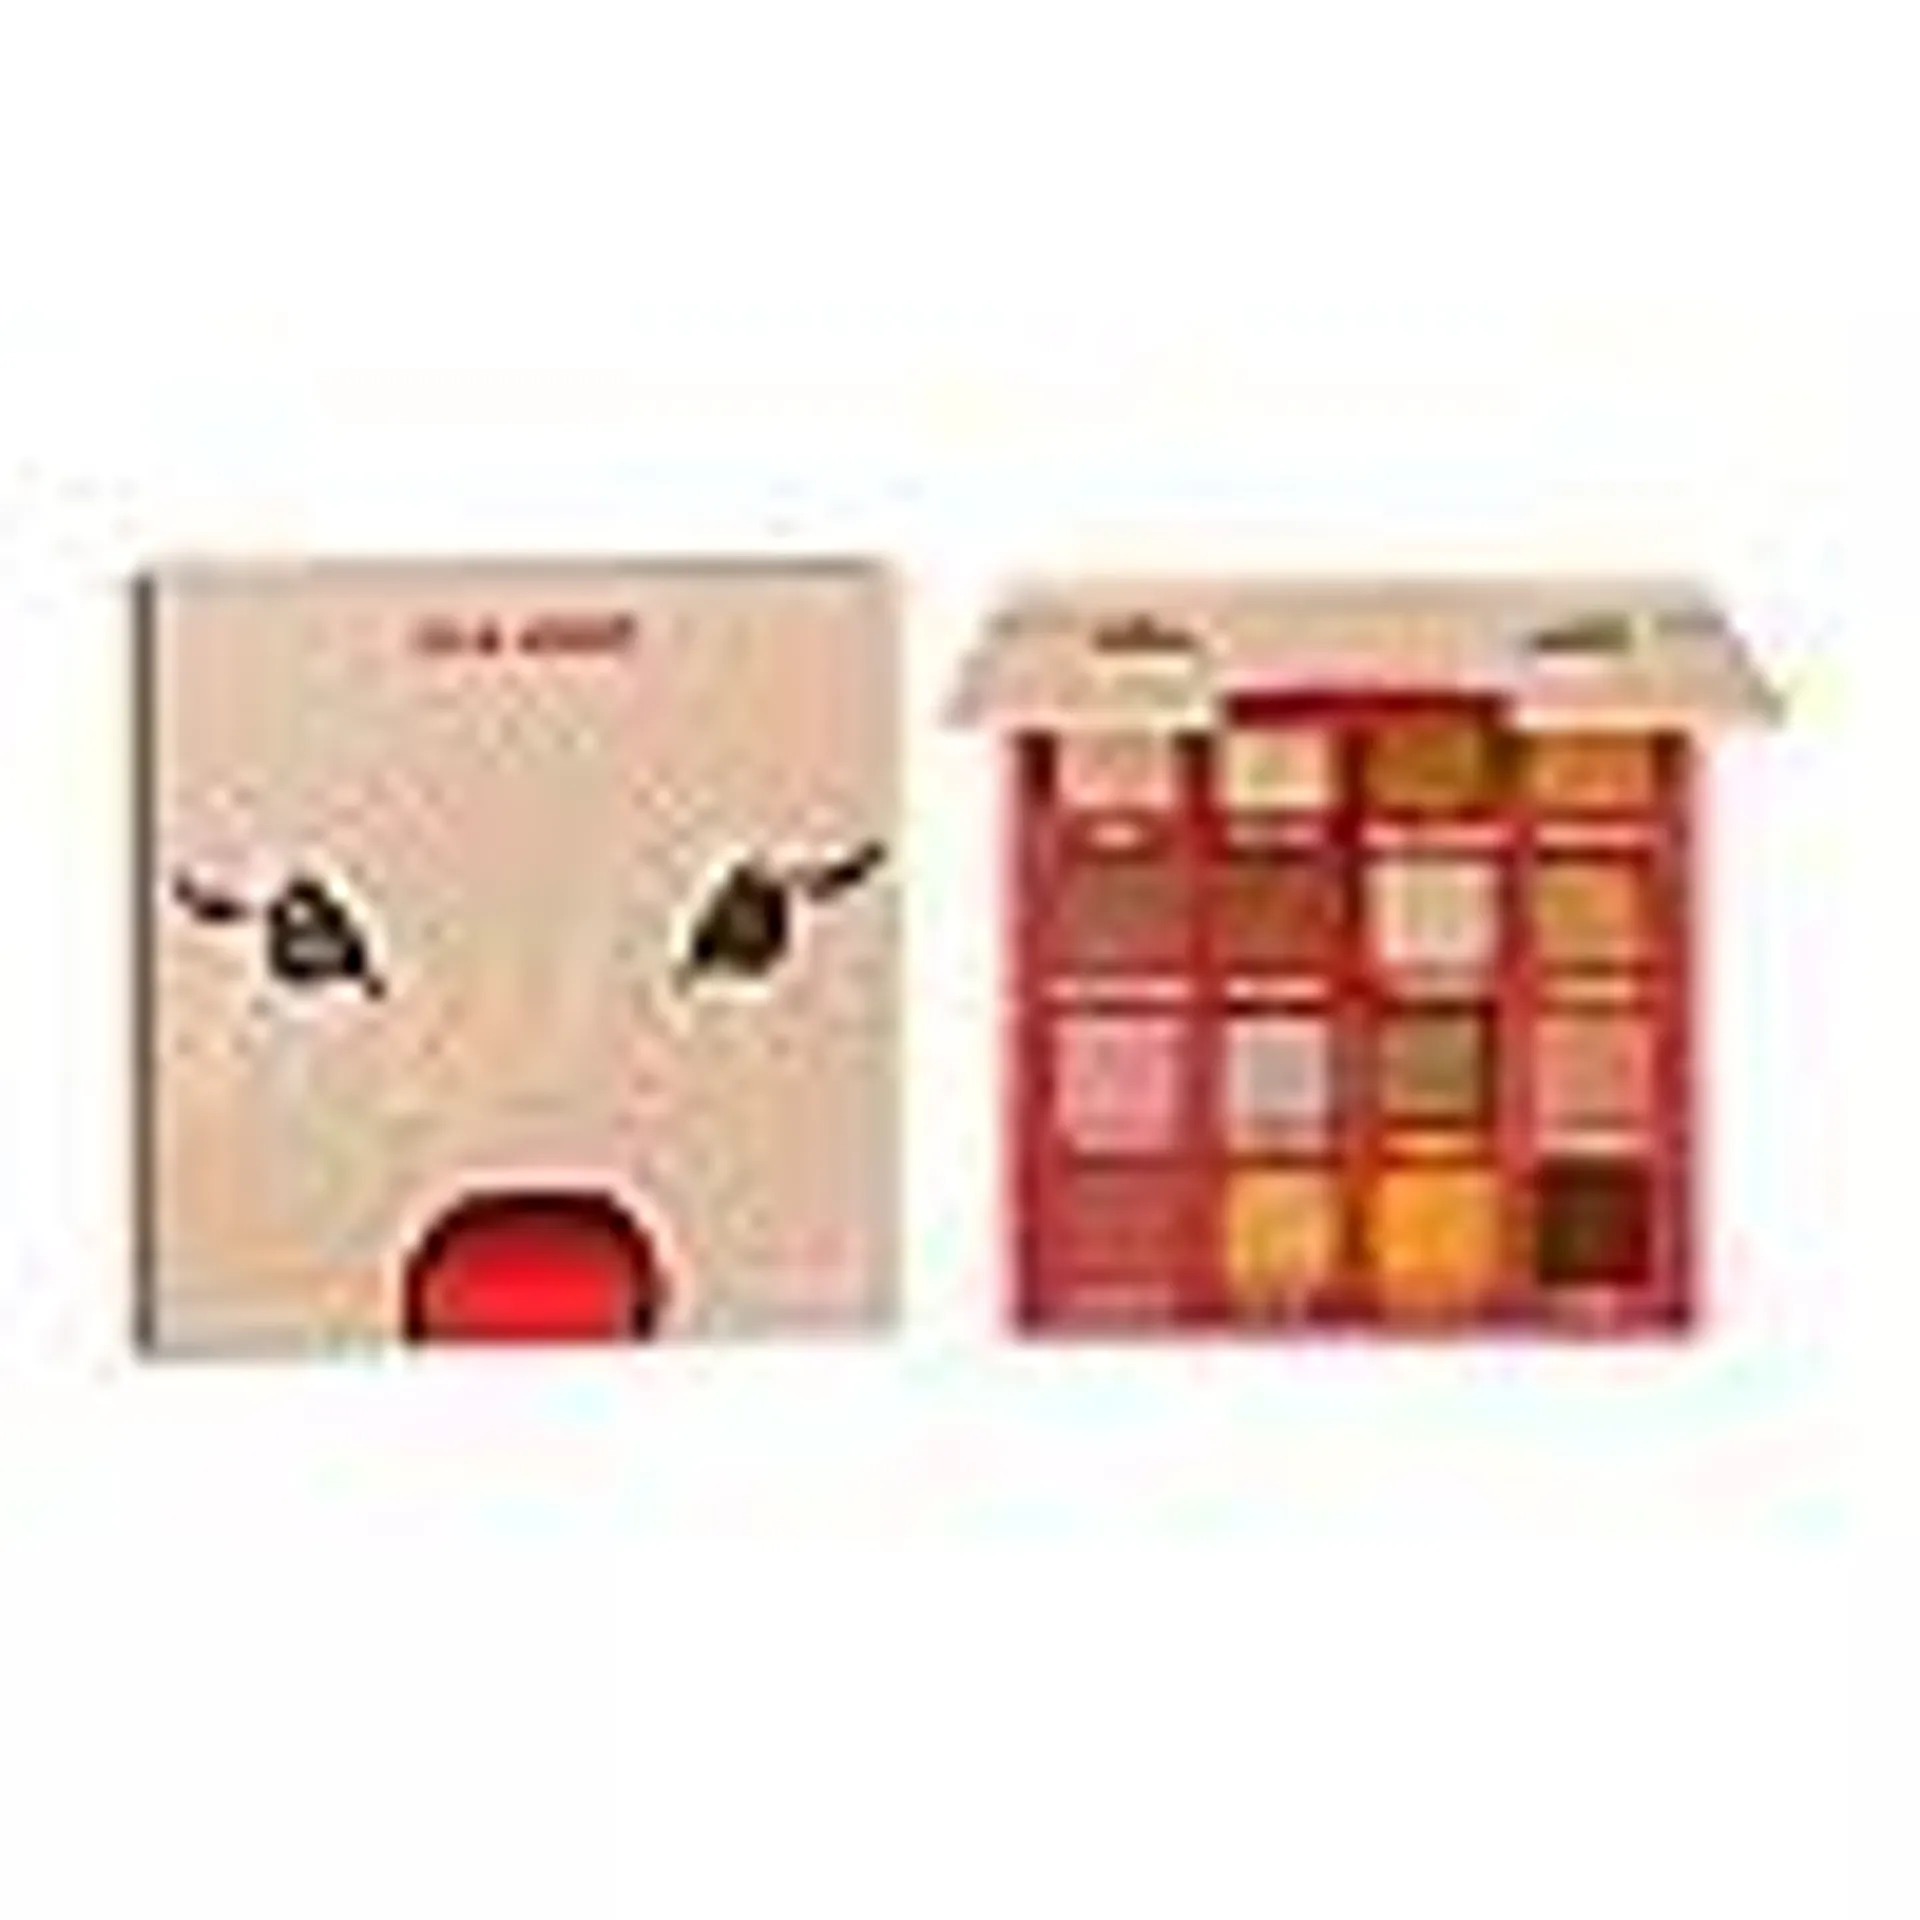 Kylie Cosmetics Holiday Collection Pressed Powder Palette